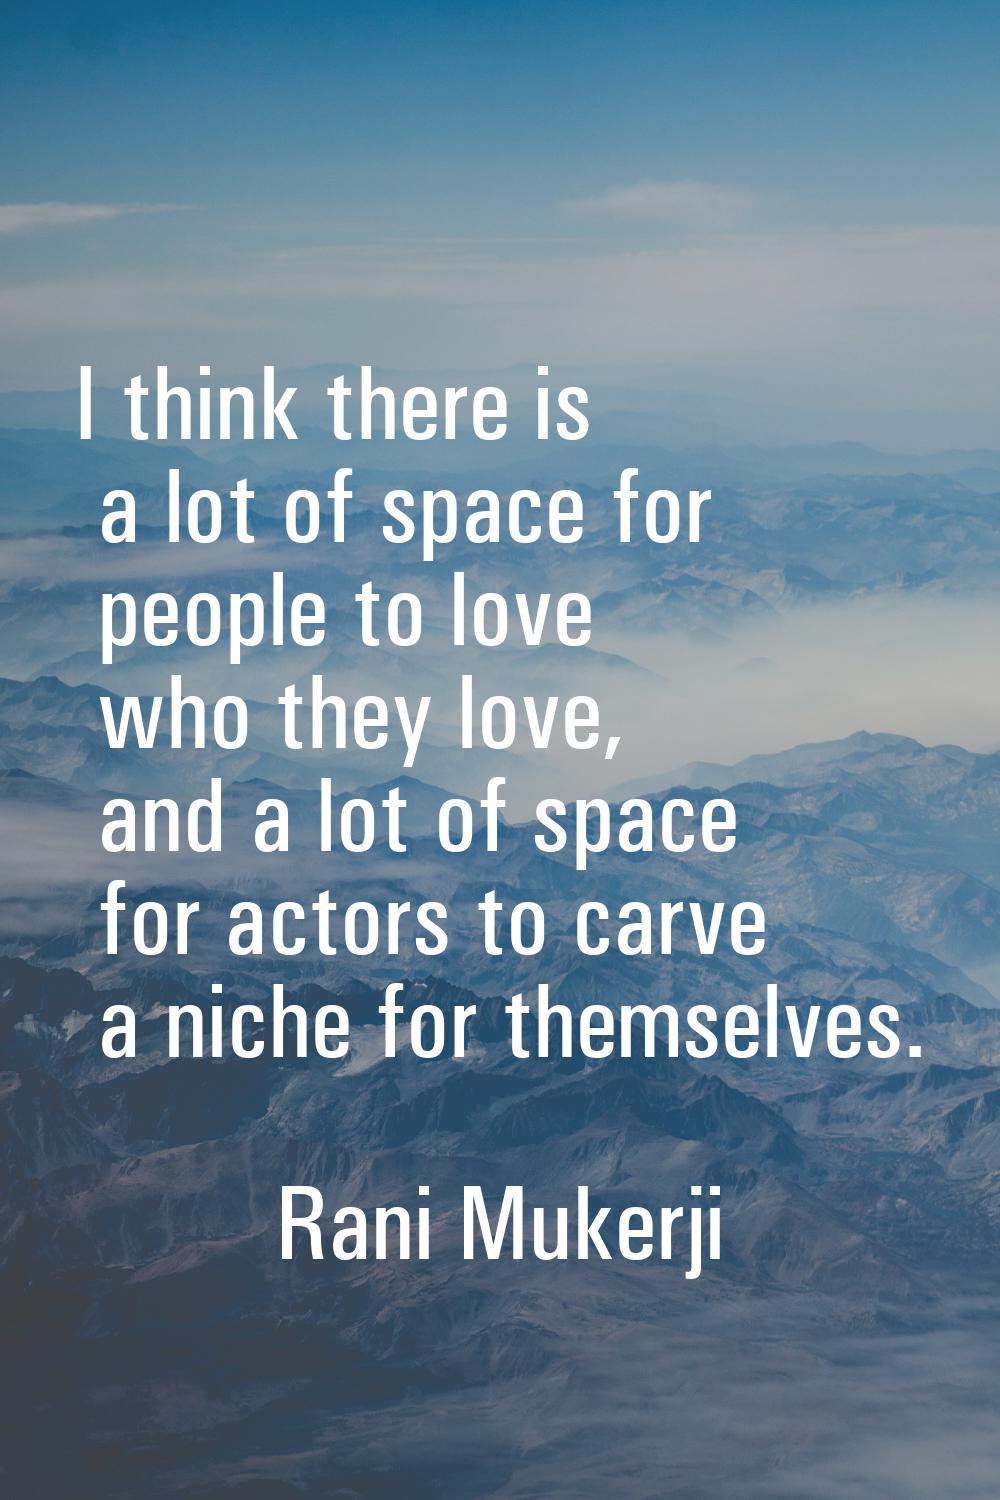 I think there is a lot of space for people to love who they love, and a lot of space for actors to 